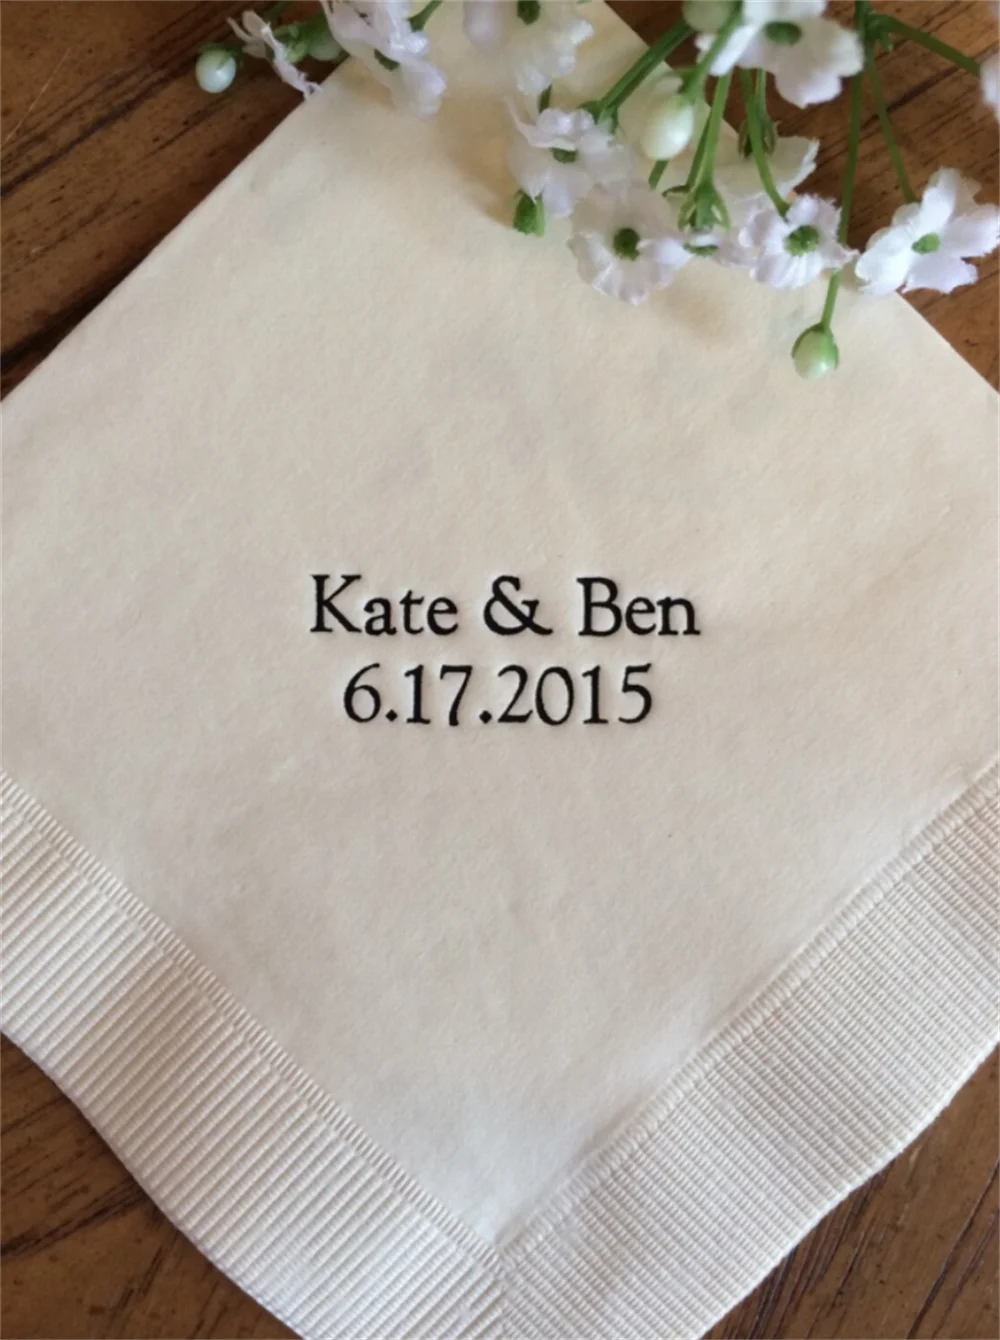 

50PCS Personalized Napkins Wedding Personalized Cocktail Beverage Paper Anniversary Party Monogram Custom Luncheon Avail!